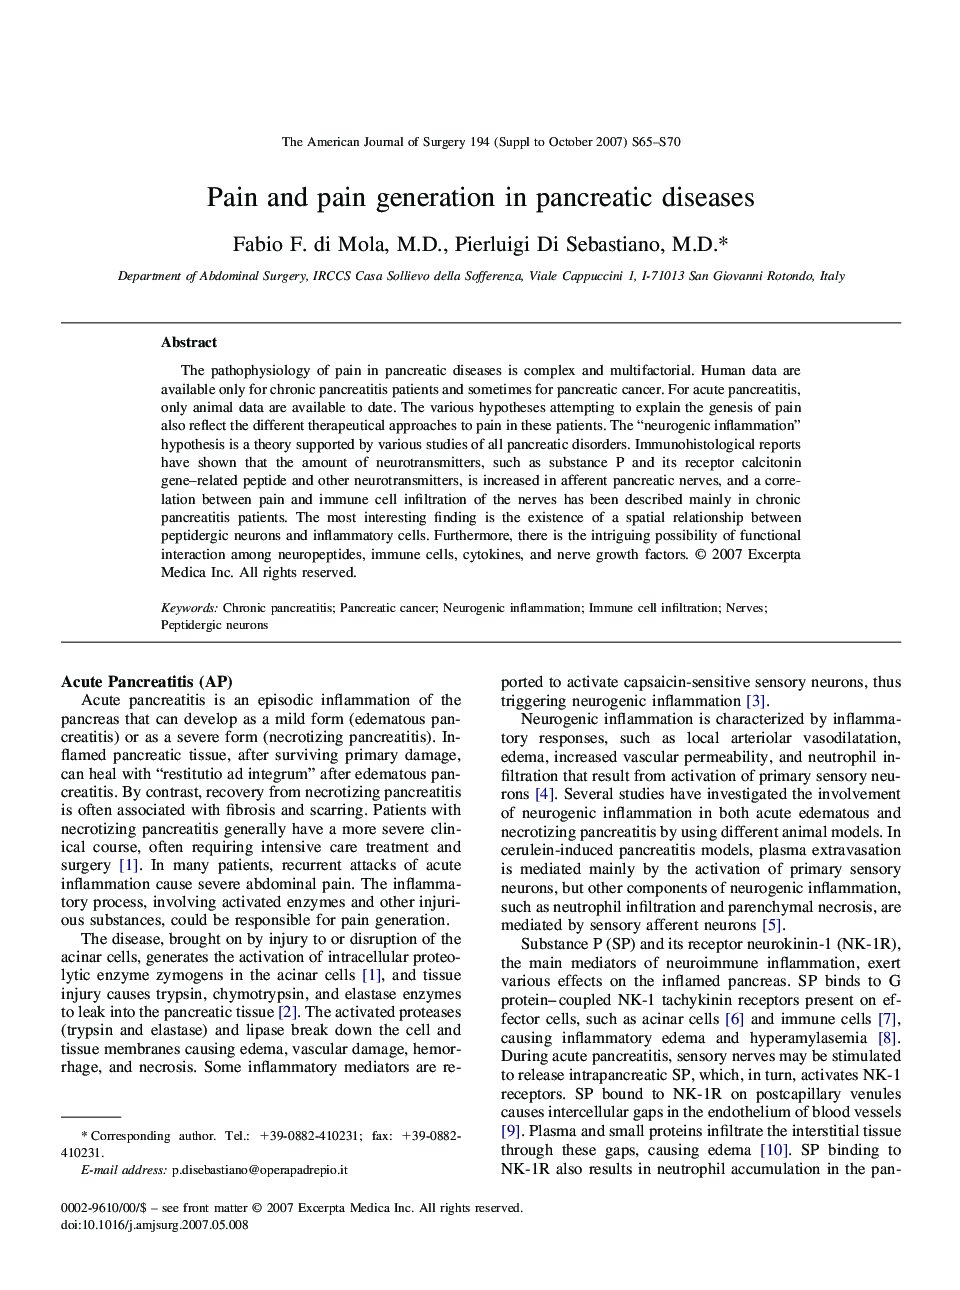 Pain and pain generation in pancreatic diseases